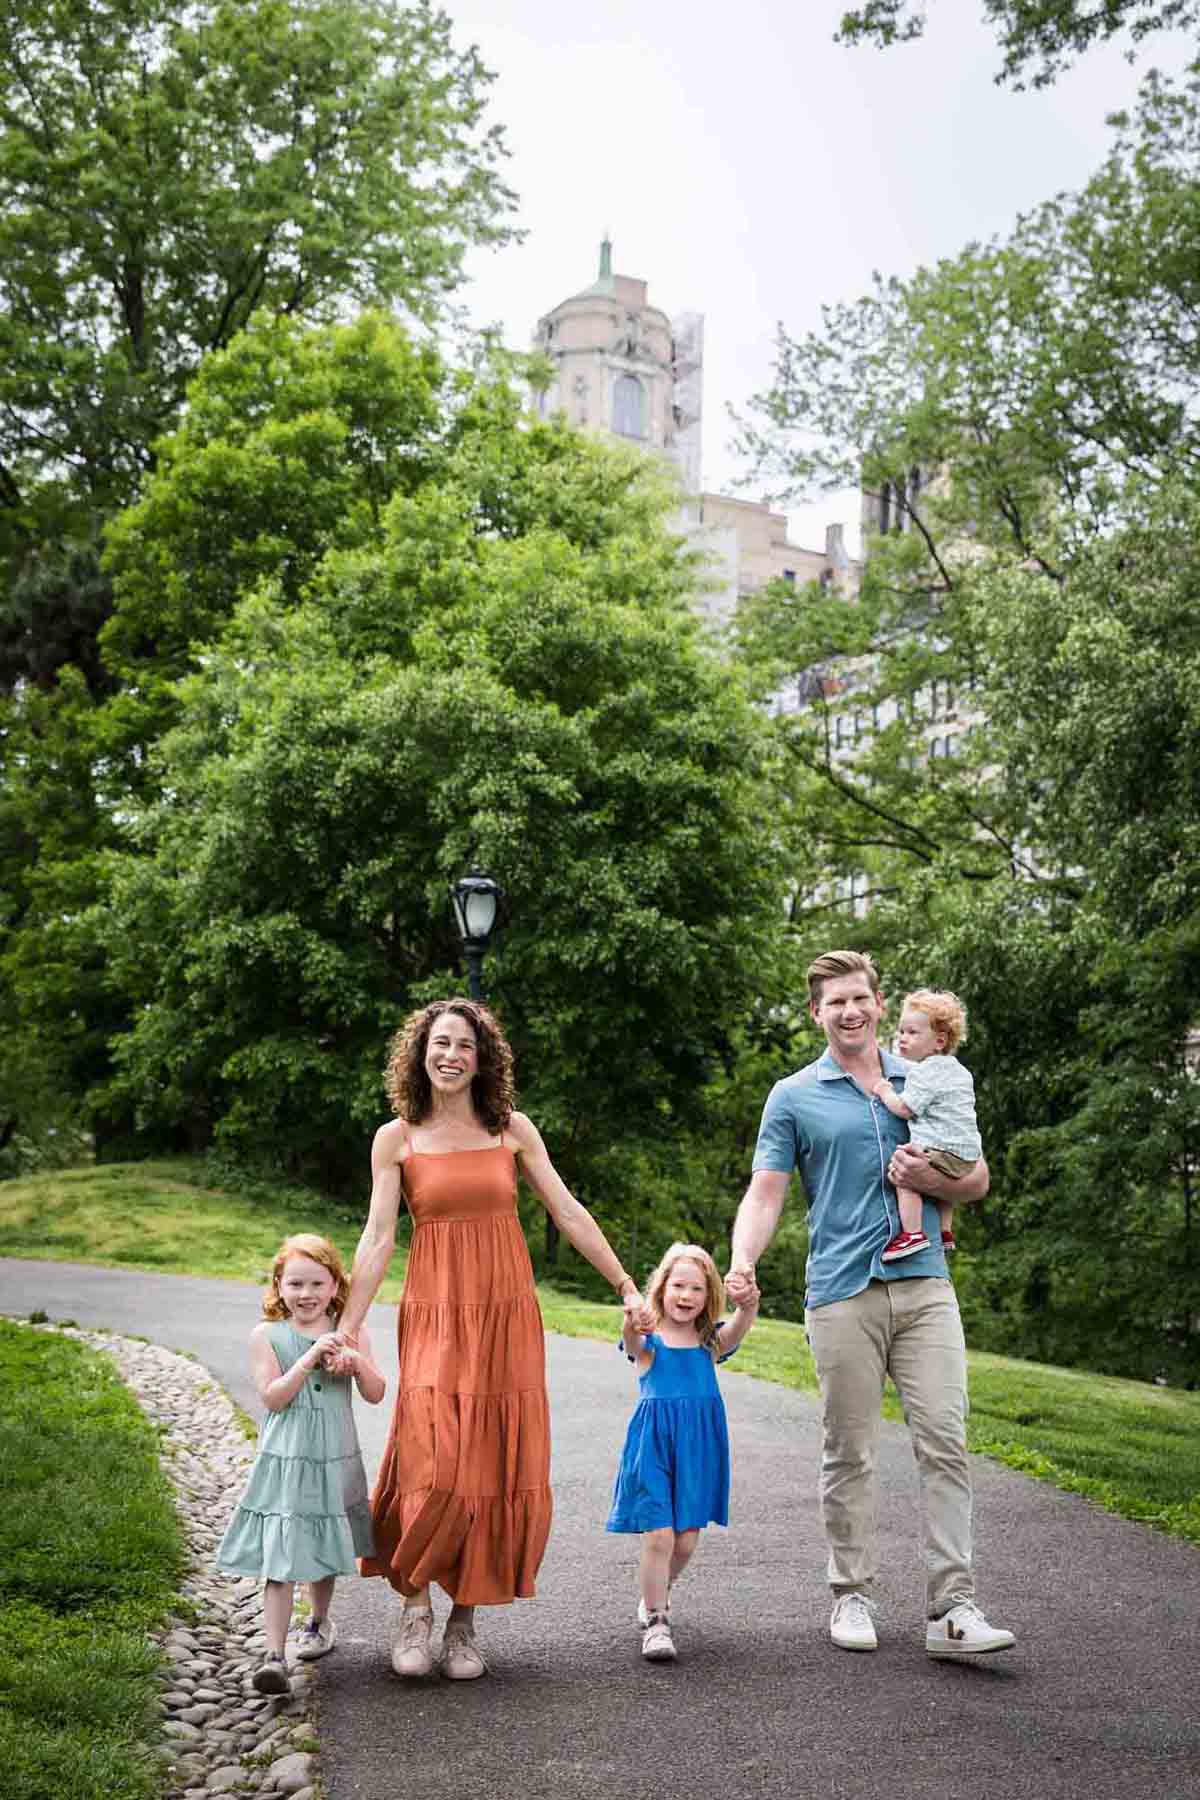 Mother and father with three kids walking up pathway in front of trees during a Central Park family portrait session